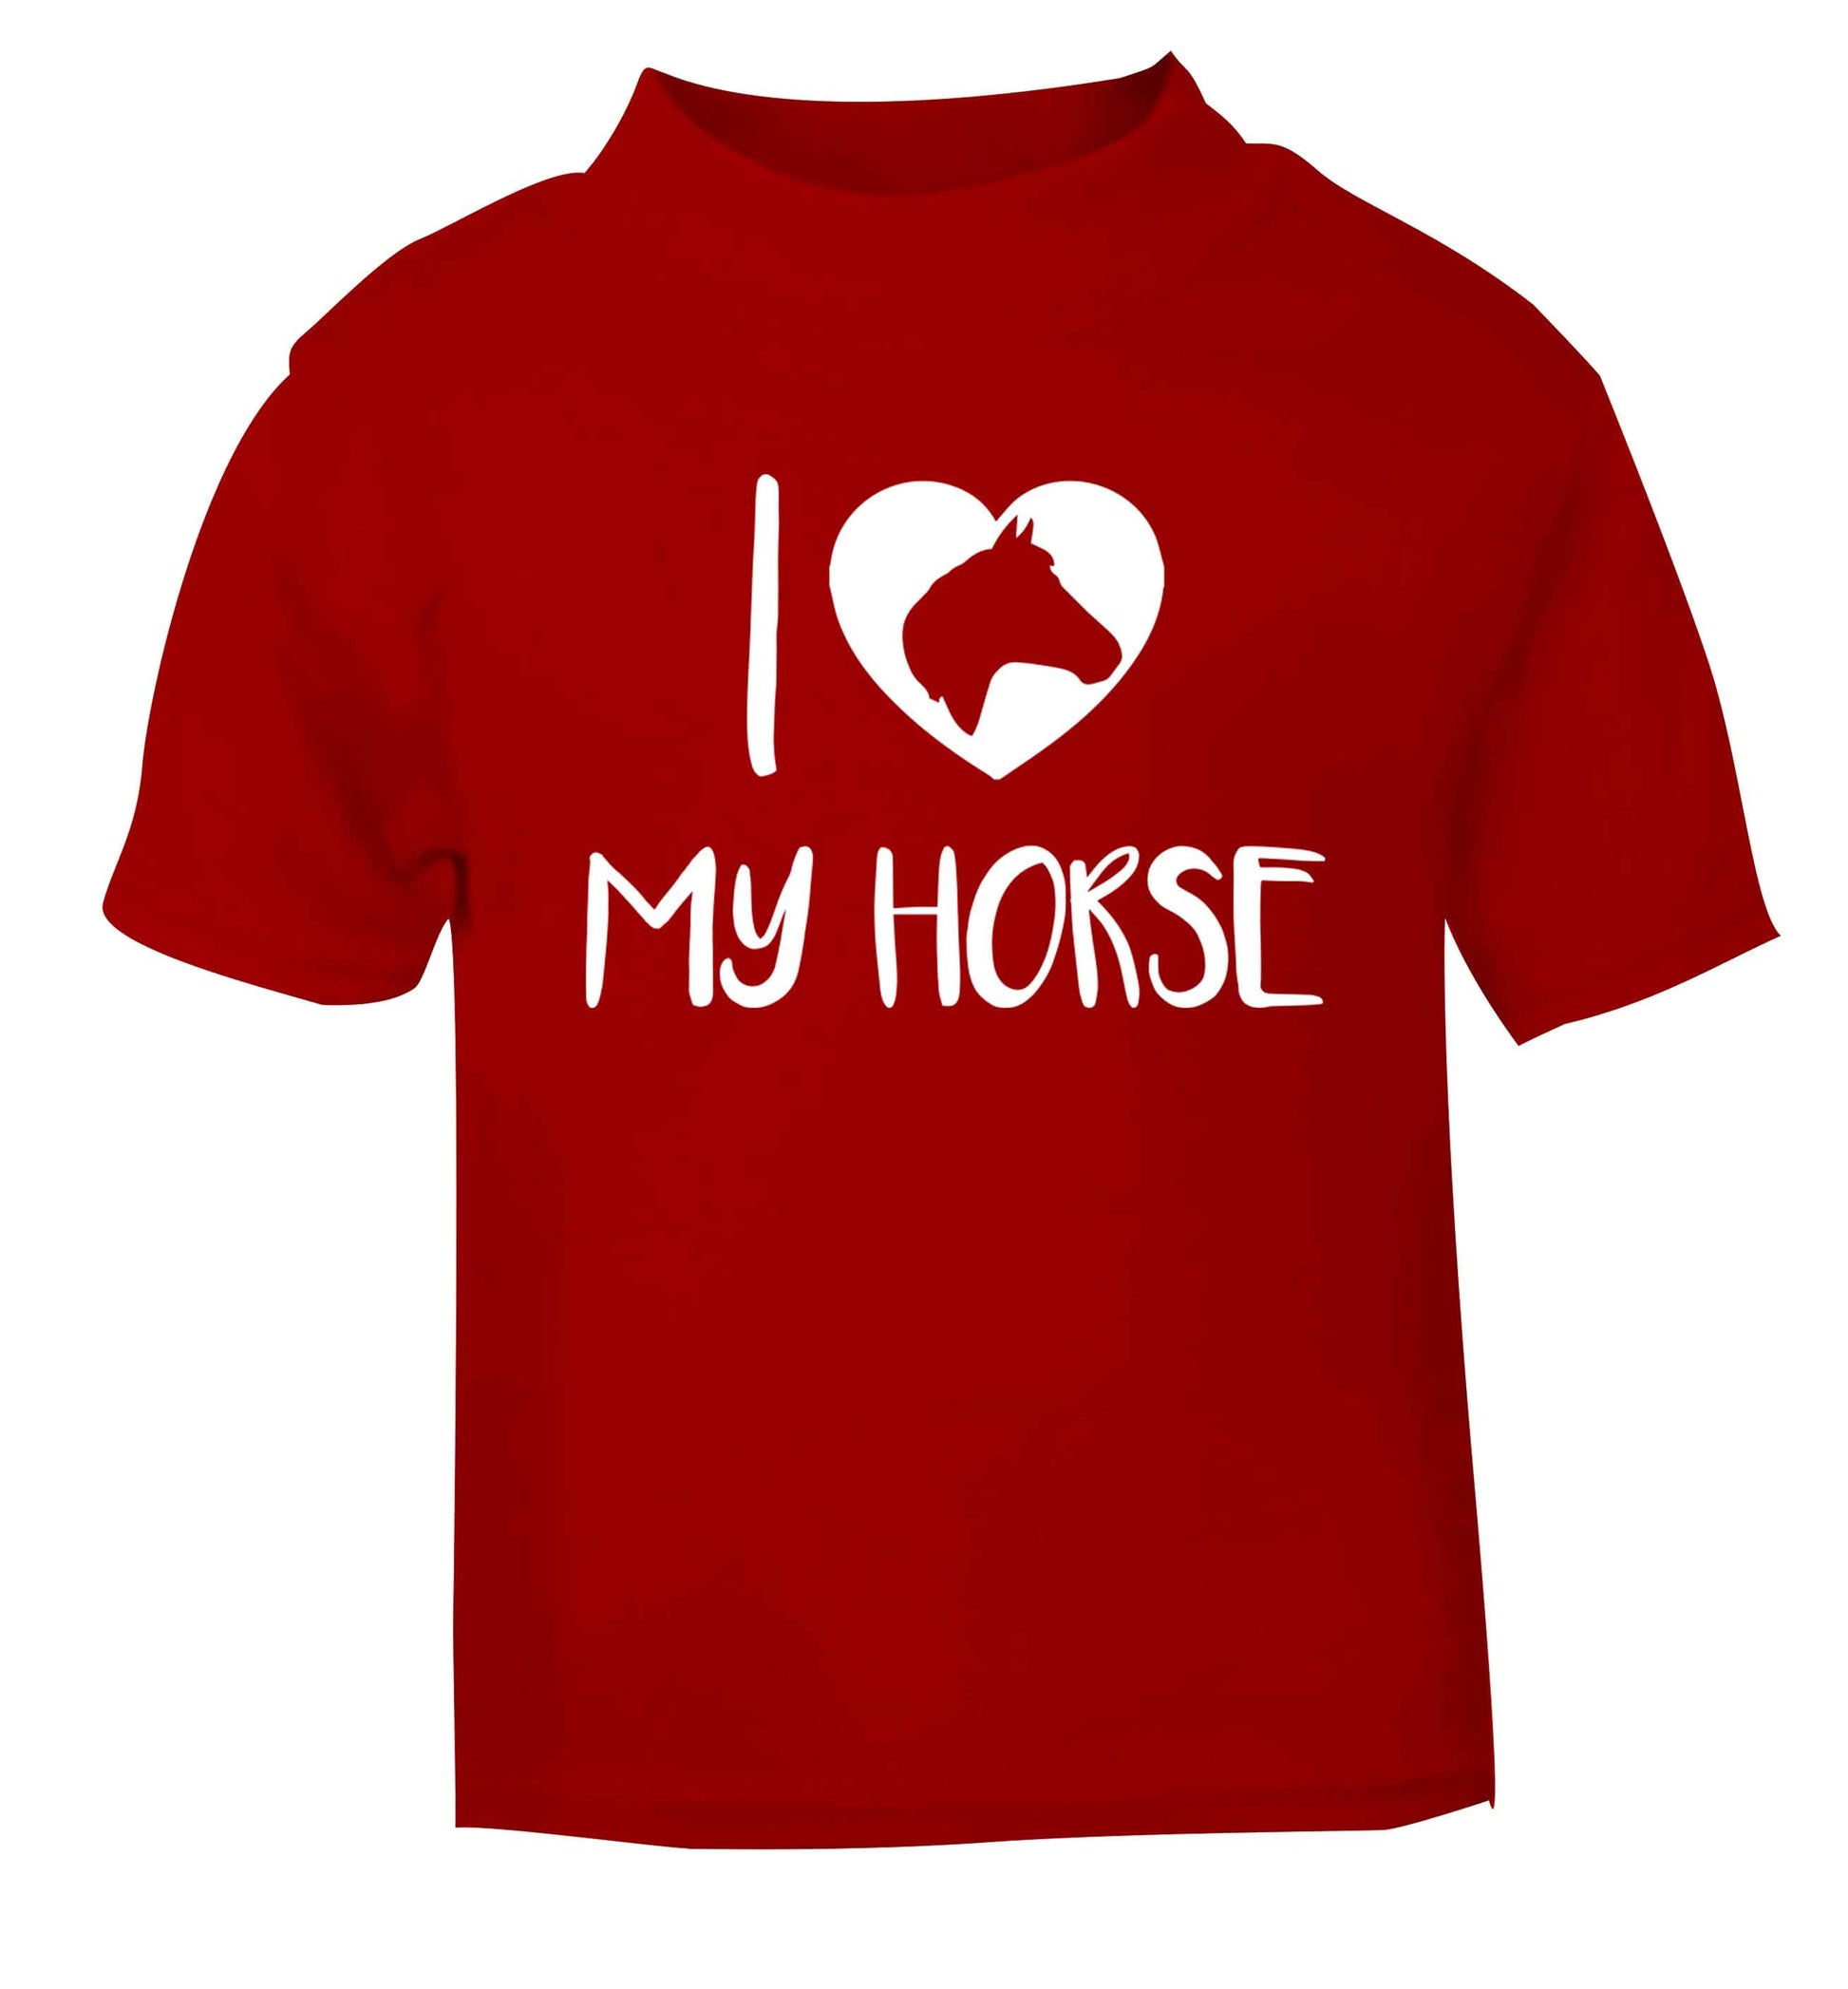 I love my horse red baby toddler Tshirt 2 Years